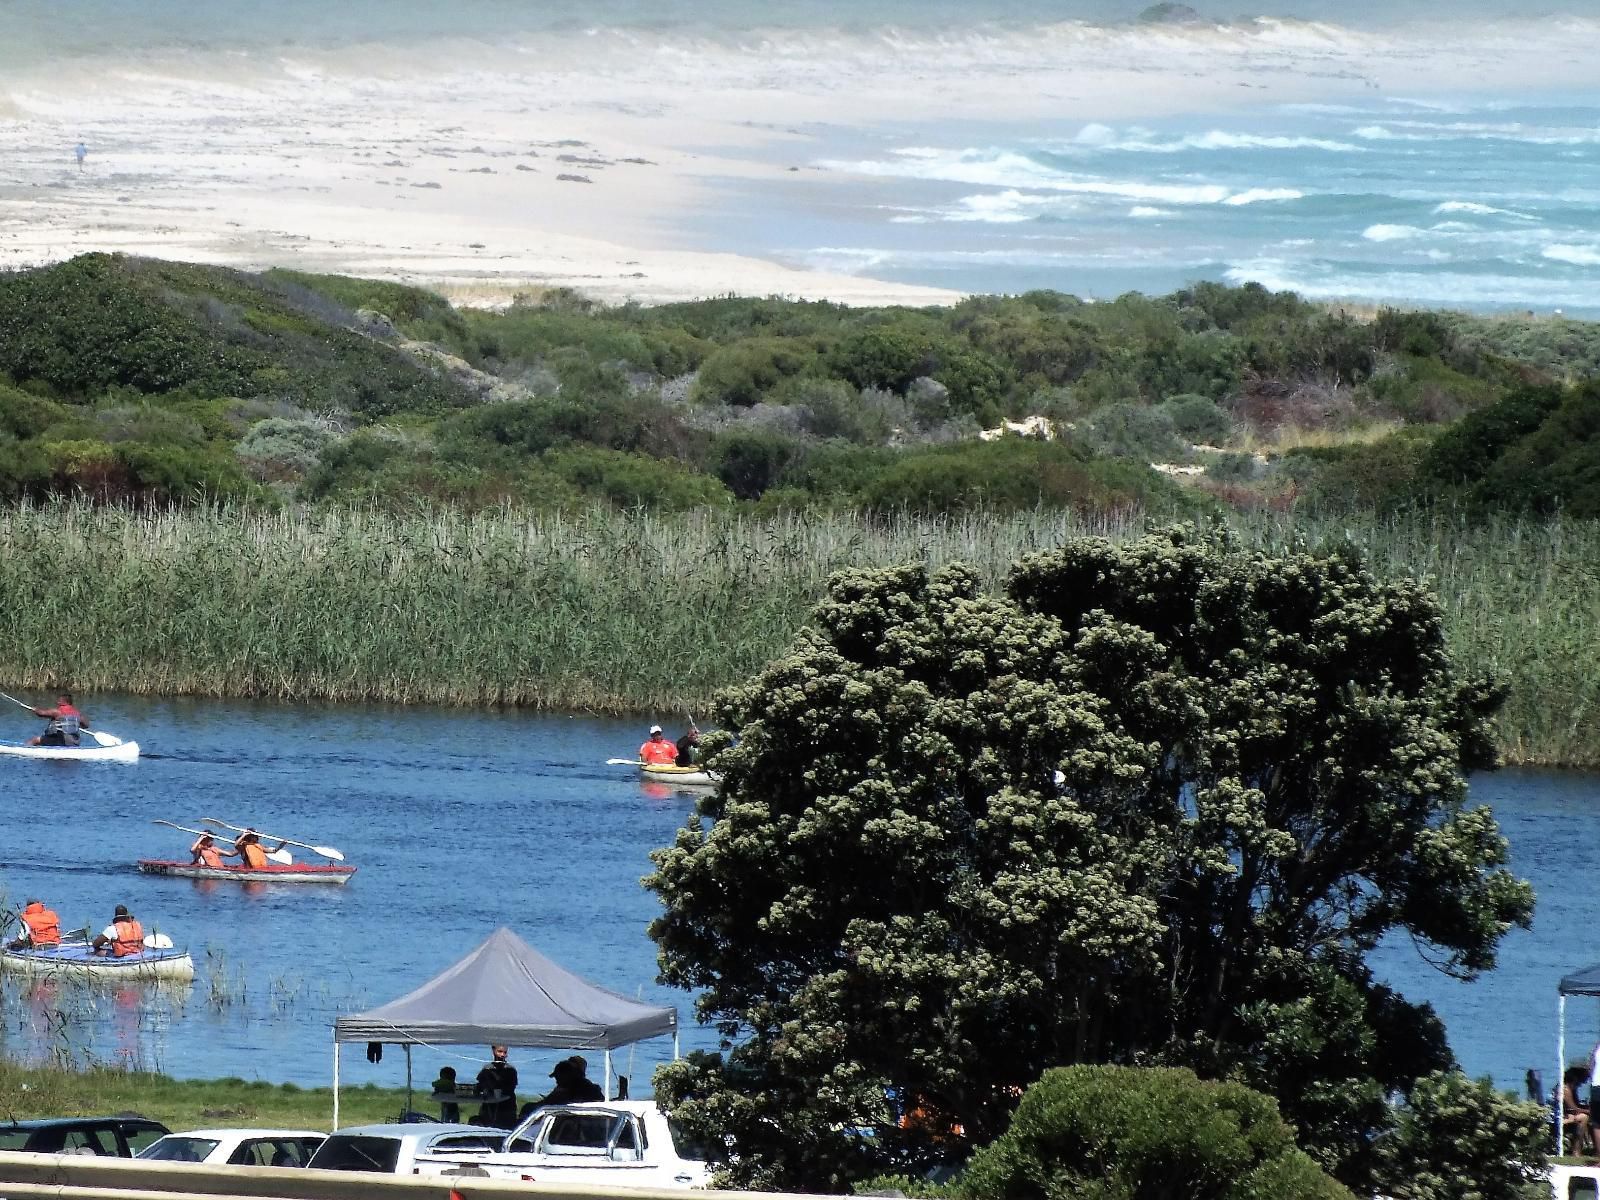 Kleinmond Panorama Self Catering Apartments Kleinmond Western Cape South Africa Boat, Vehicle, Beach, Nature, Sand